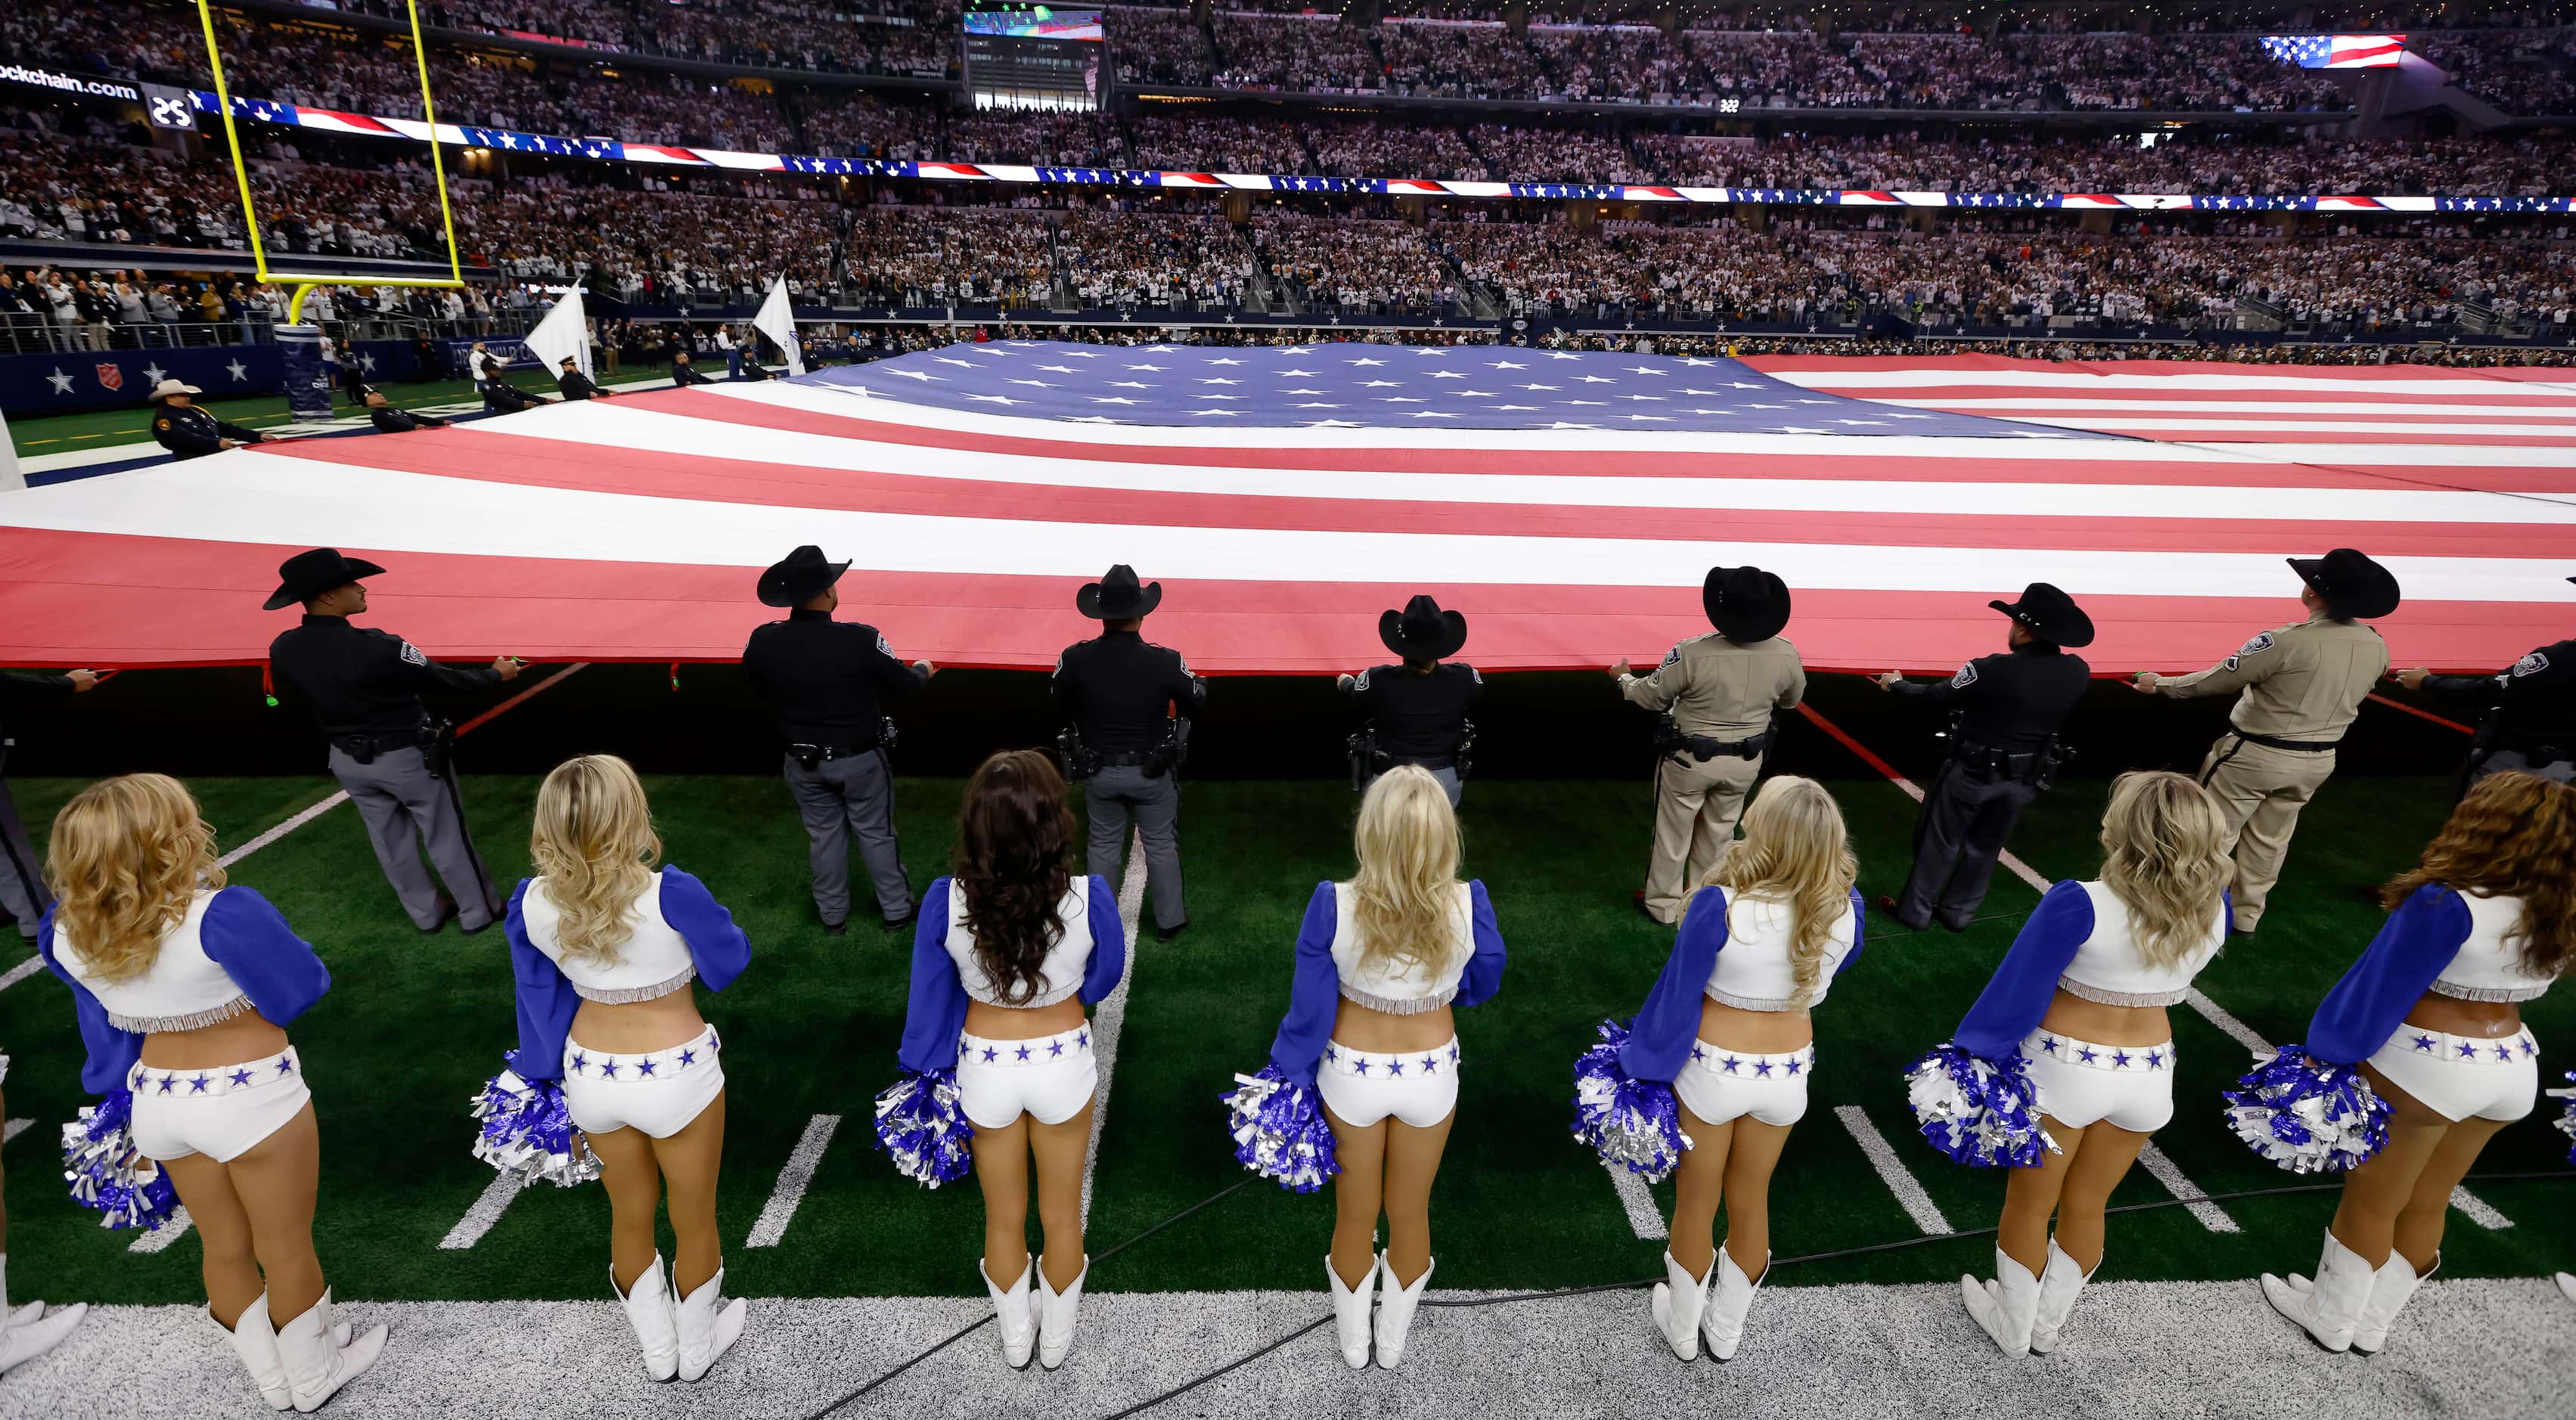 As the Dallas Cowboys Cheerleaders line the sideline, law enforcement officers stretch a...